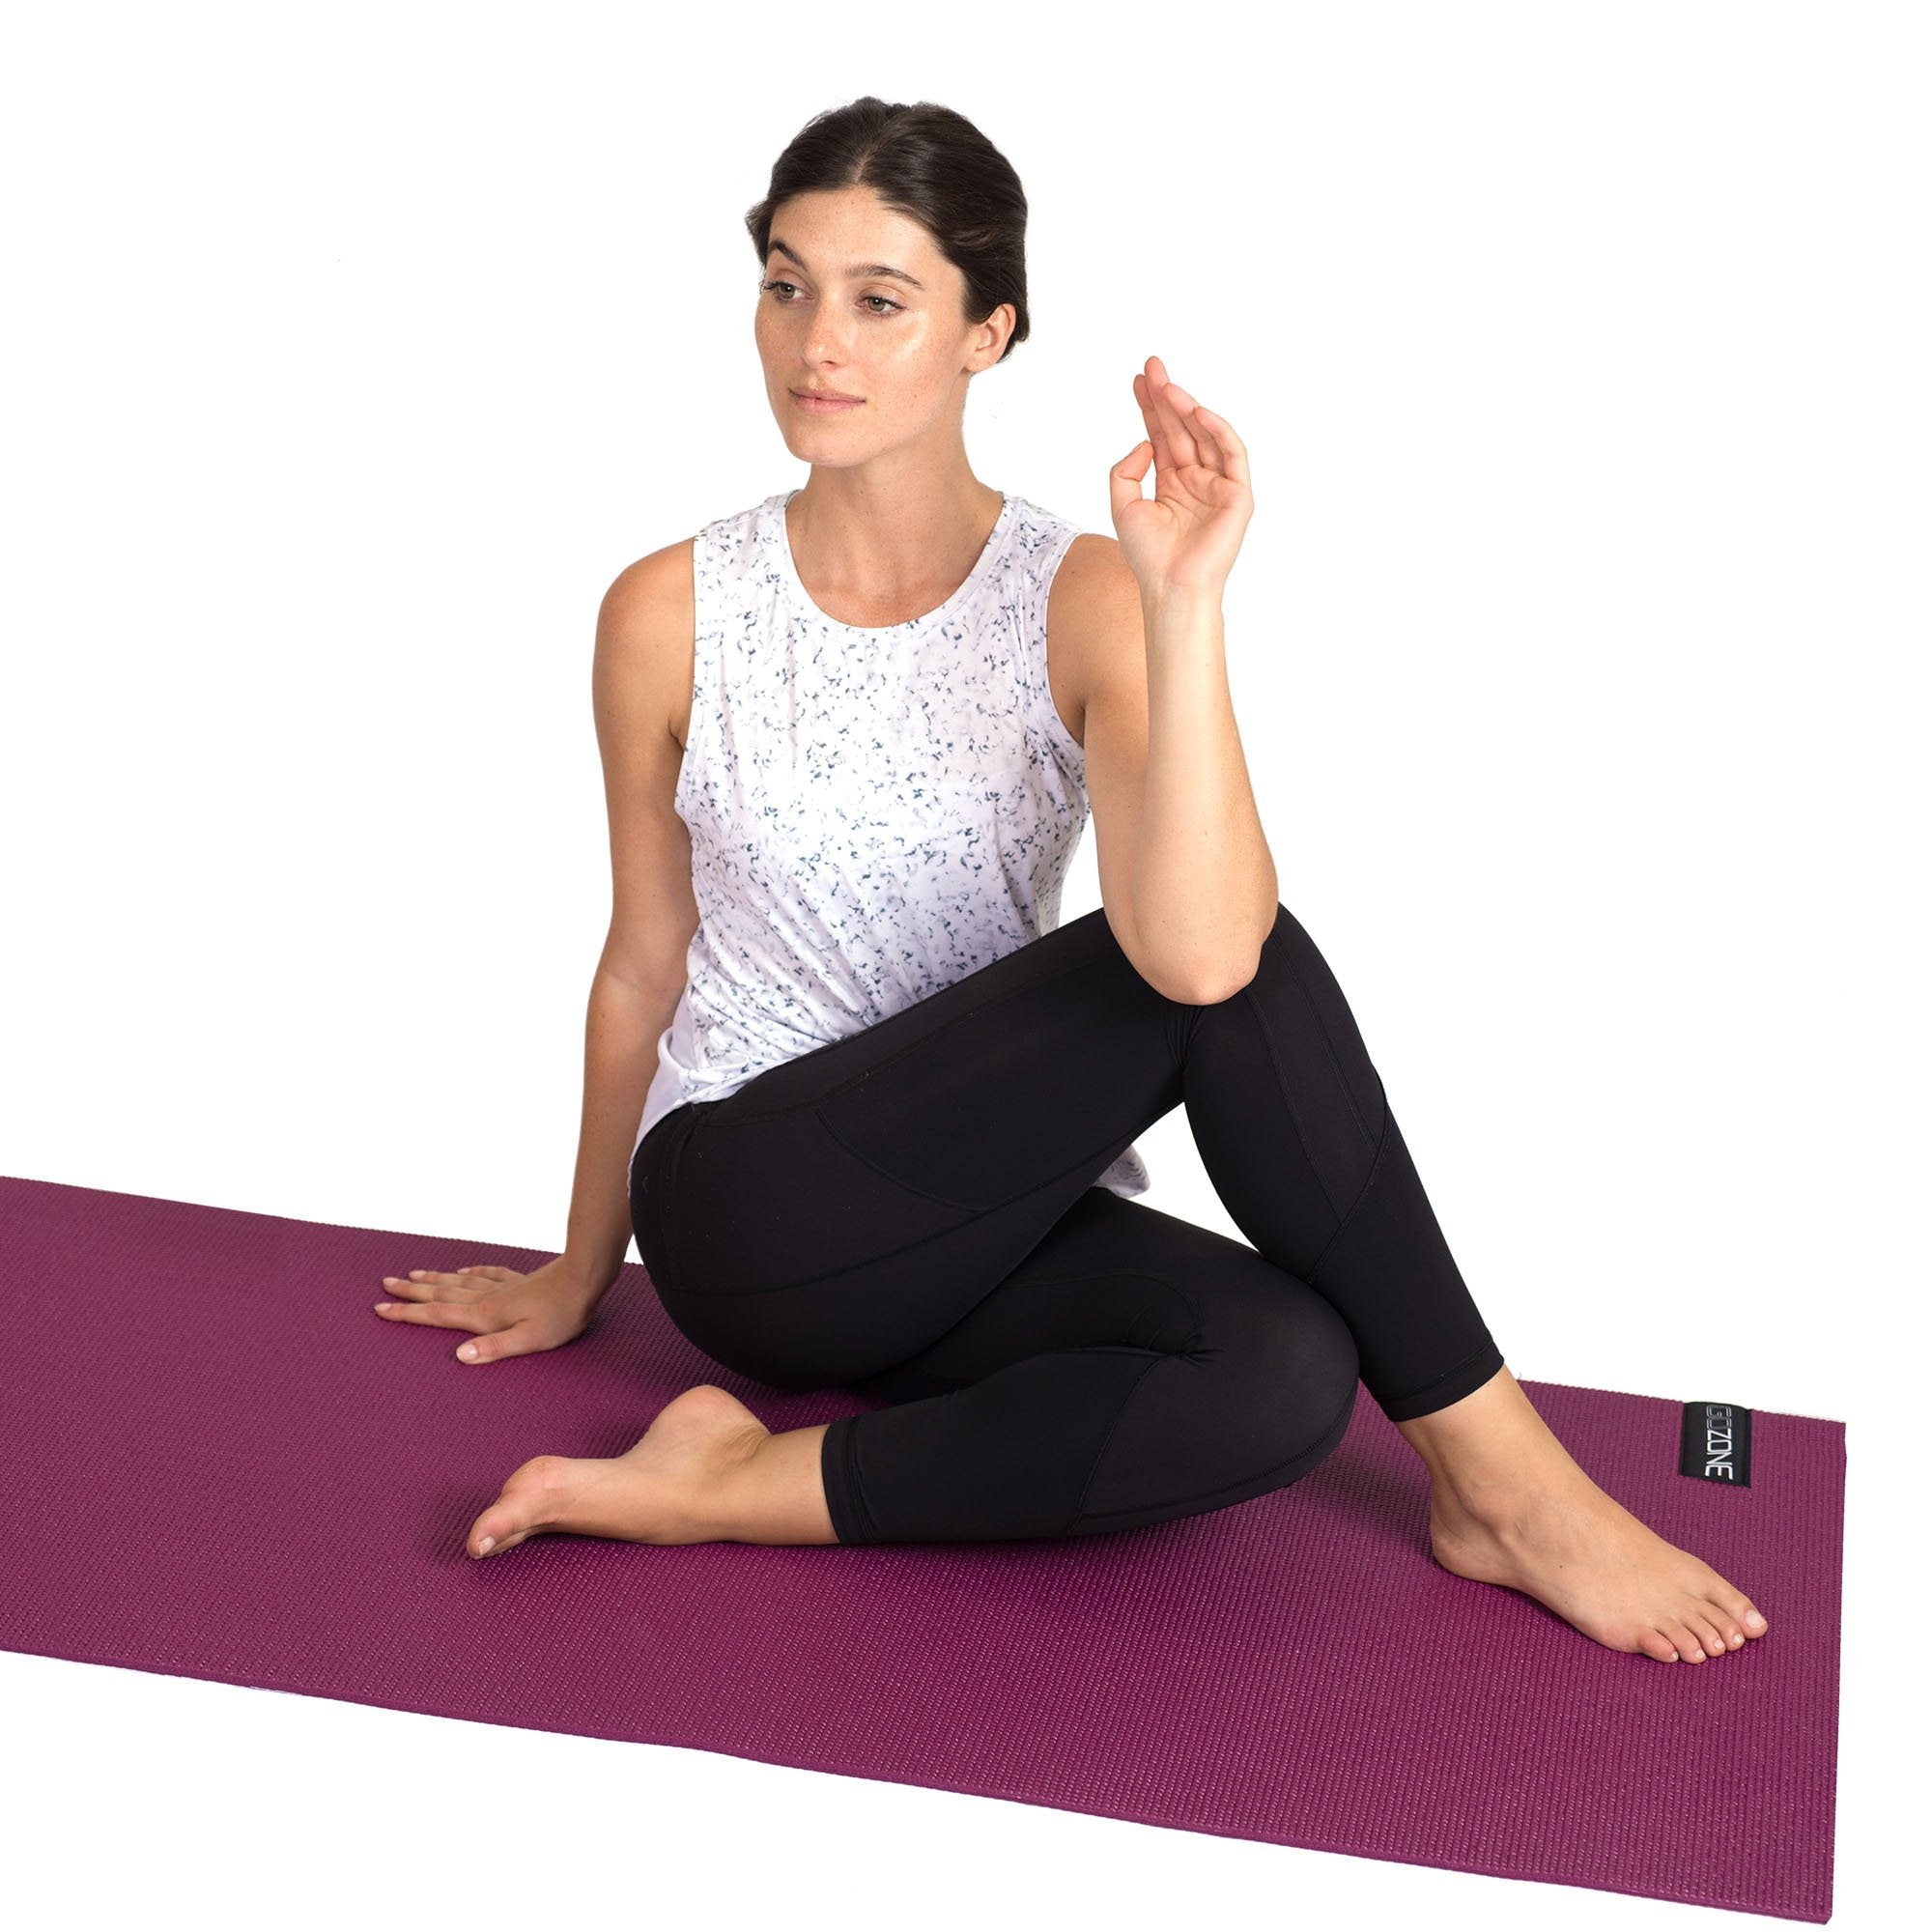 GoZone Printed Foldable Yoga Mat – Purple, Durable and lightweight 